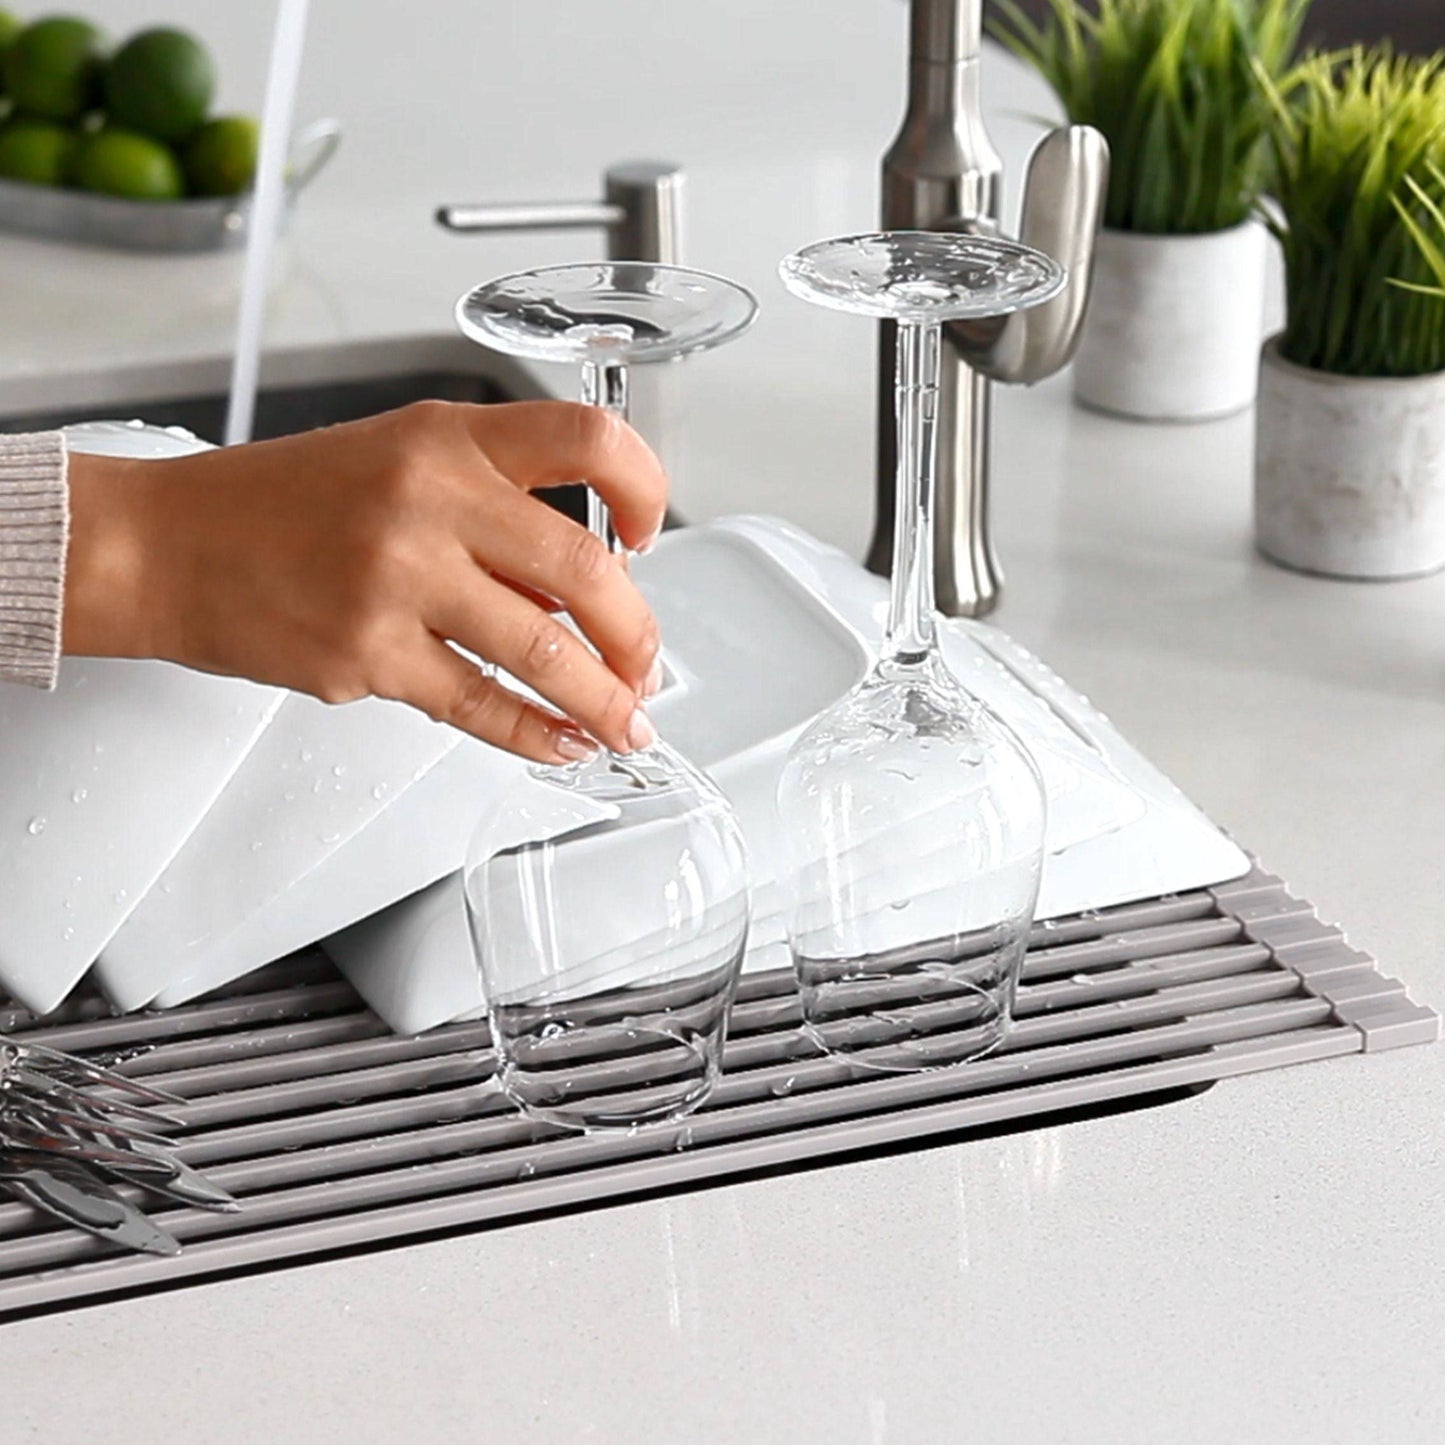 Stylish 20" Over the Sink Roll-up Drying Rack Gray A-900GY - Renoz